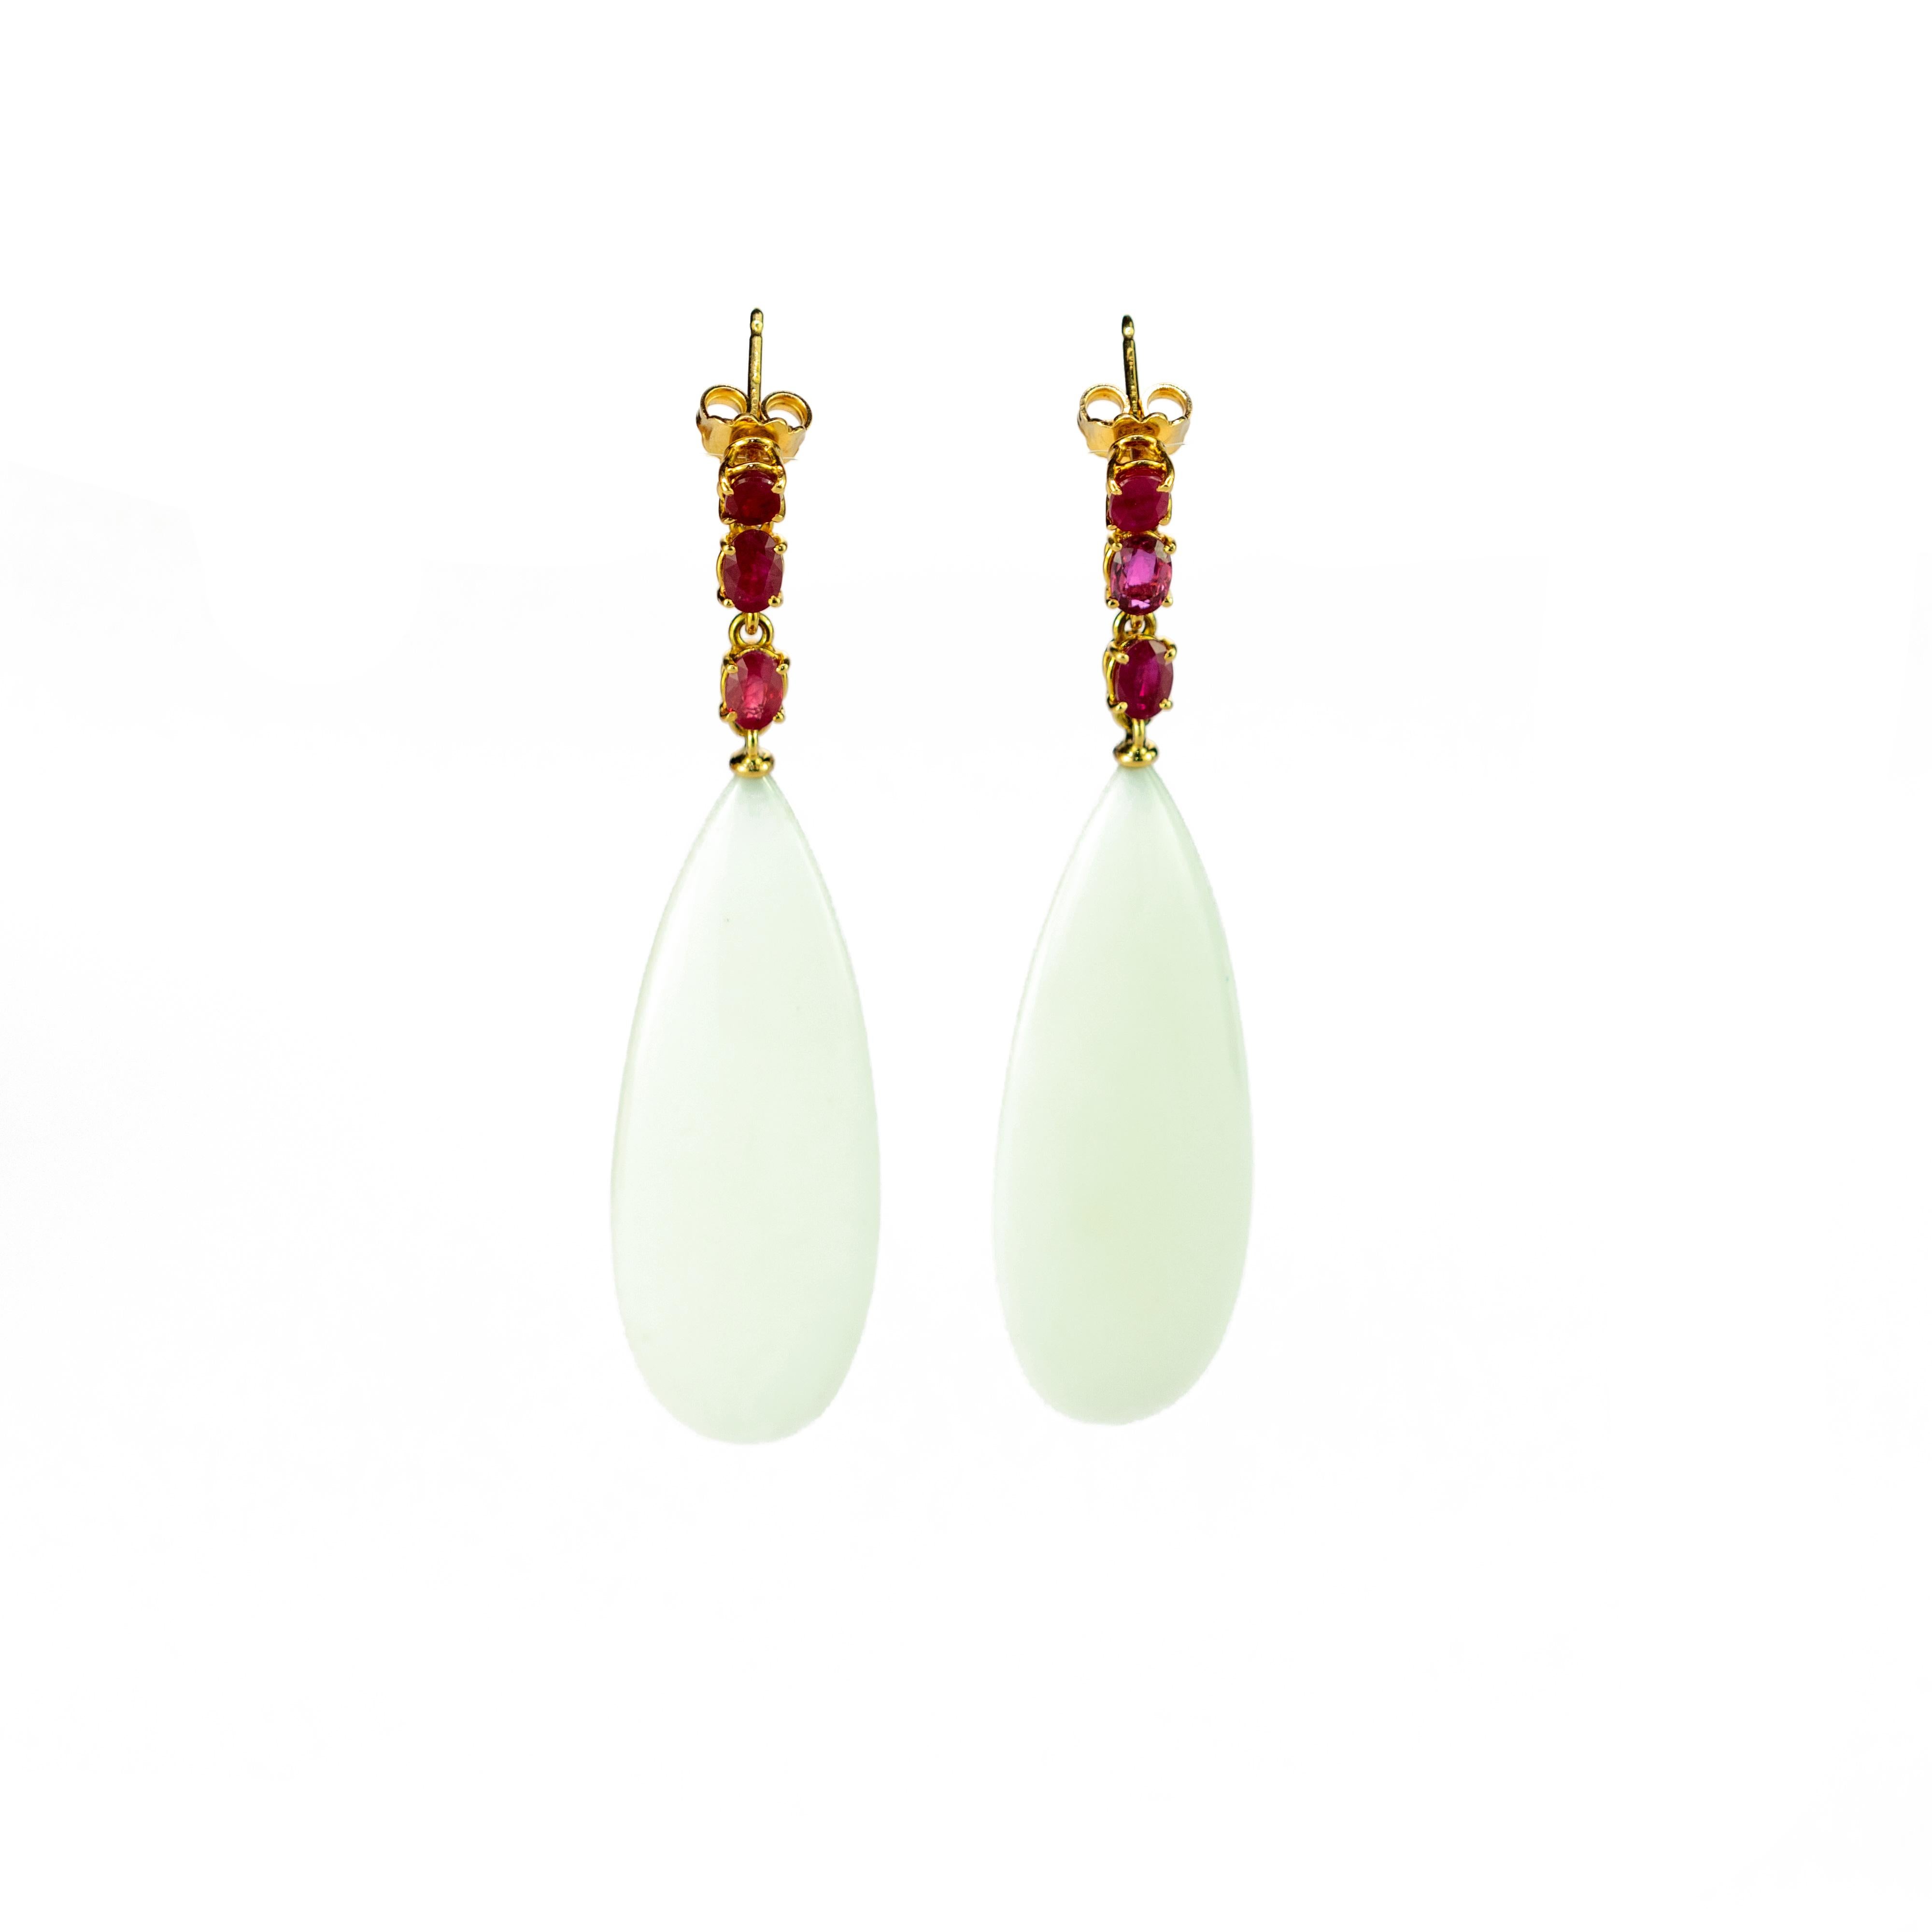 White agate chandelier long drops with six rubies gems combining voluminous shapes with vivid colours, resulting in bold, free-spirited pieces with a charming elegance.

This design is inspired by the magic of the Northern Lights. The white melts in